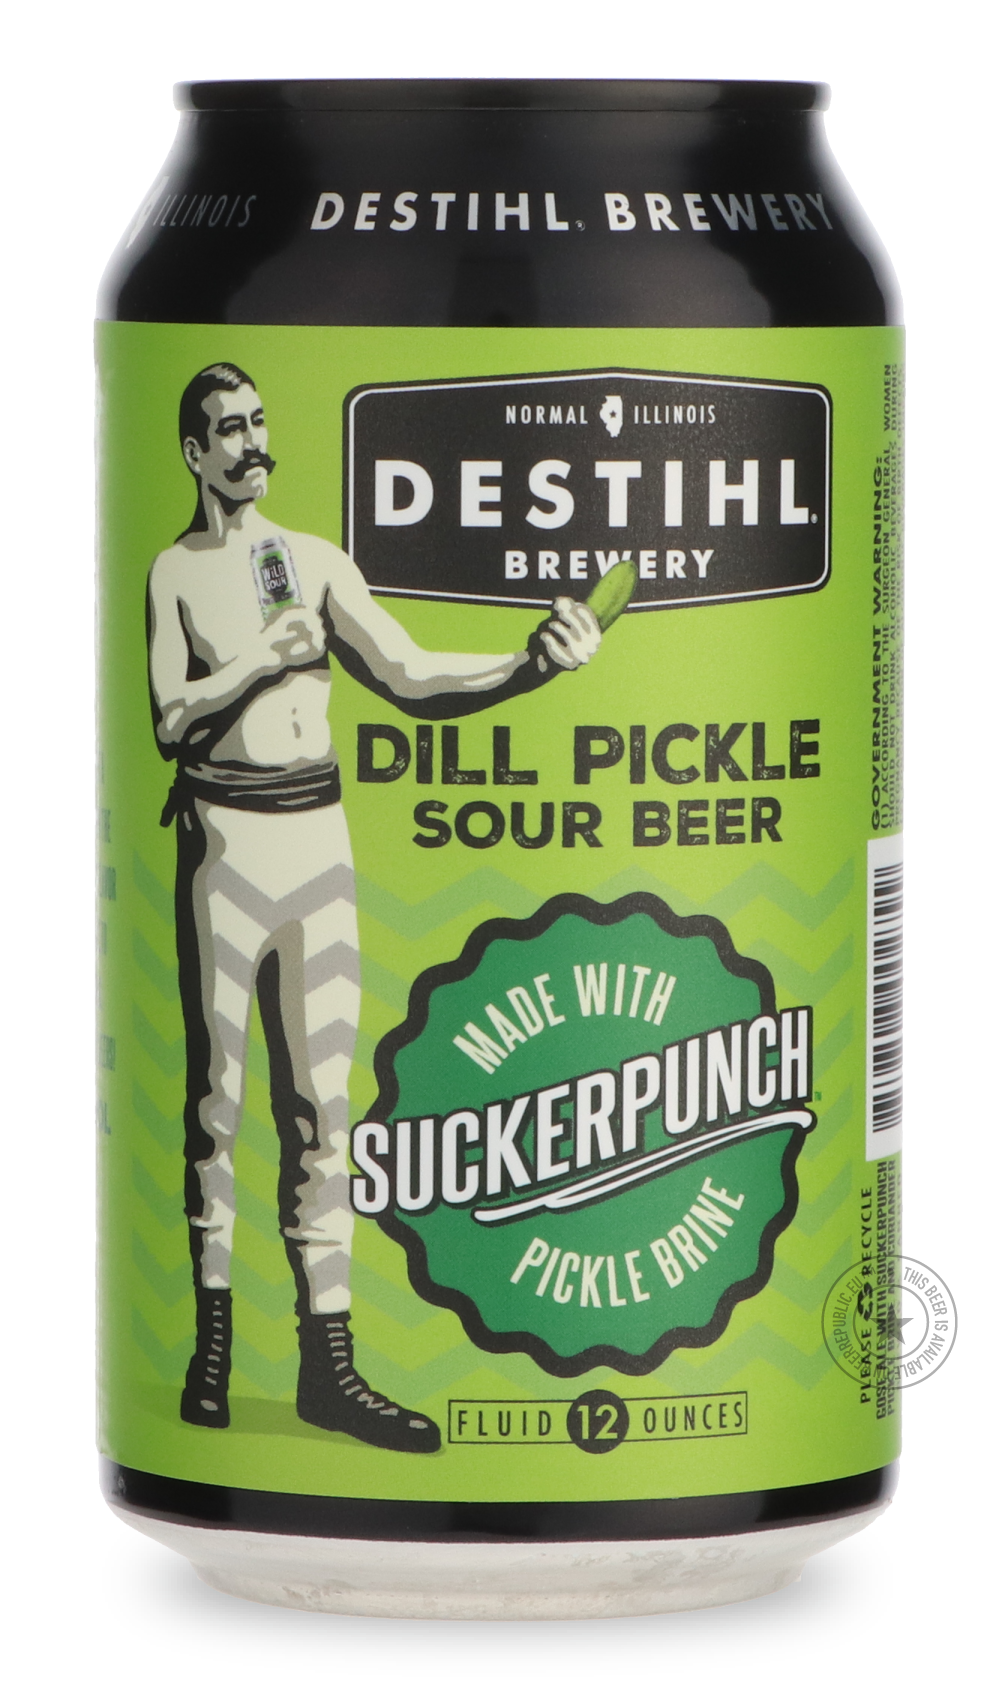 -Destihl- Dill Pickle Sour Beer - SuckerPunch-Sour / Wild & Fruity- Only @ Beer Republic - The best online beer store for American & Canadian craft beer - Buy beer online from the USA and Canada - Bier online kopen - Amerikaans bier kopen - Craft beer store - Craft beer kopen - Amerikanisch bier kaufen - Bier online kaufen - Acheter biere online - IPA - Stout - Porter - New England IPA - Hazy IPA - Imperial Stout - Barrel Aged - Barrel Aged Imperial Stout - Brown - Dark beer - Blond - Blonde - Pilsner - Lag